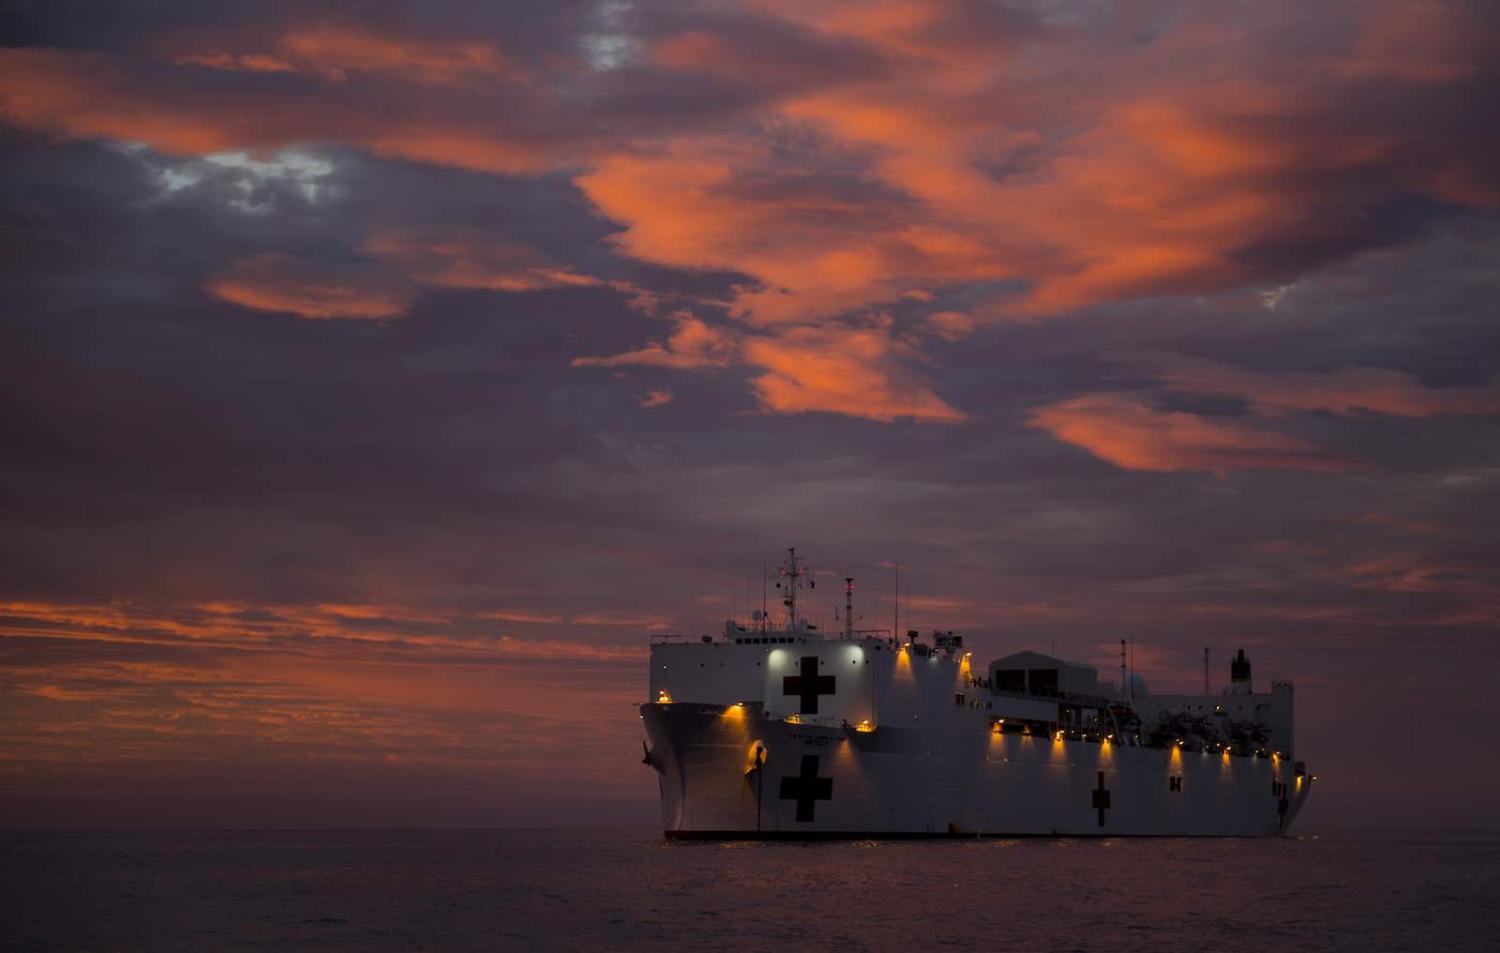 The world’s largest hospital ship, USNS Mercy, sits at anchor off Bougainville in 2015 (Photo: Gonzalo Alonso/Flickr)